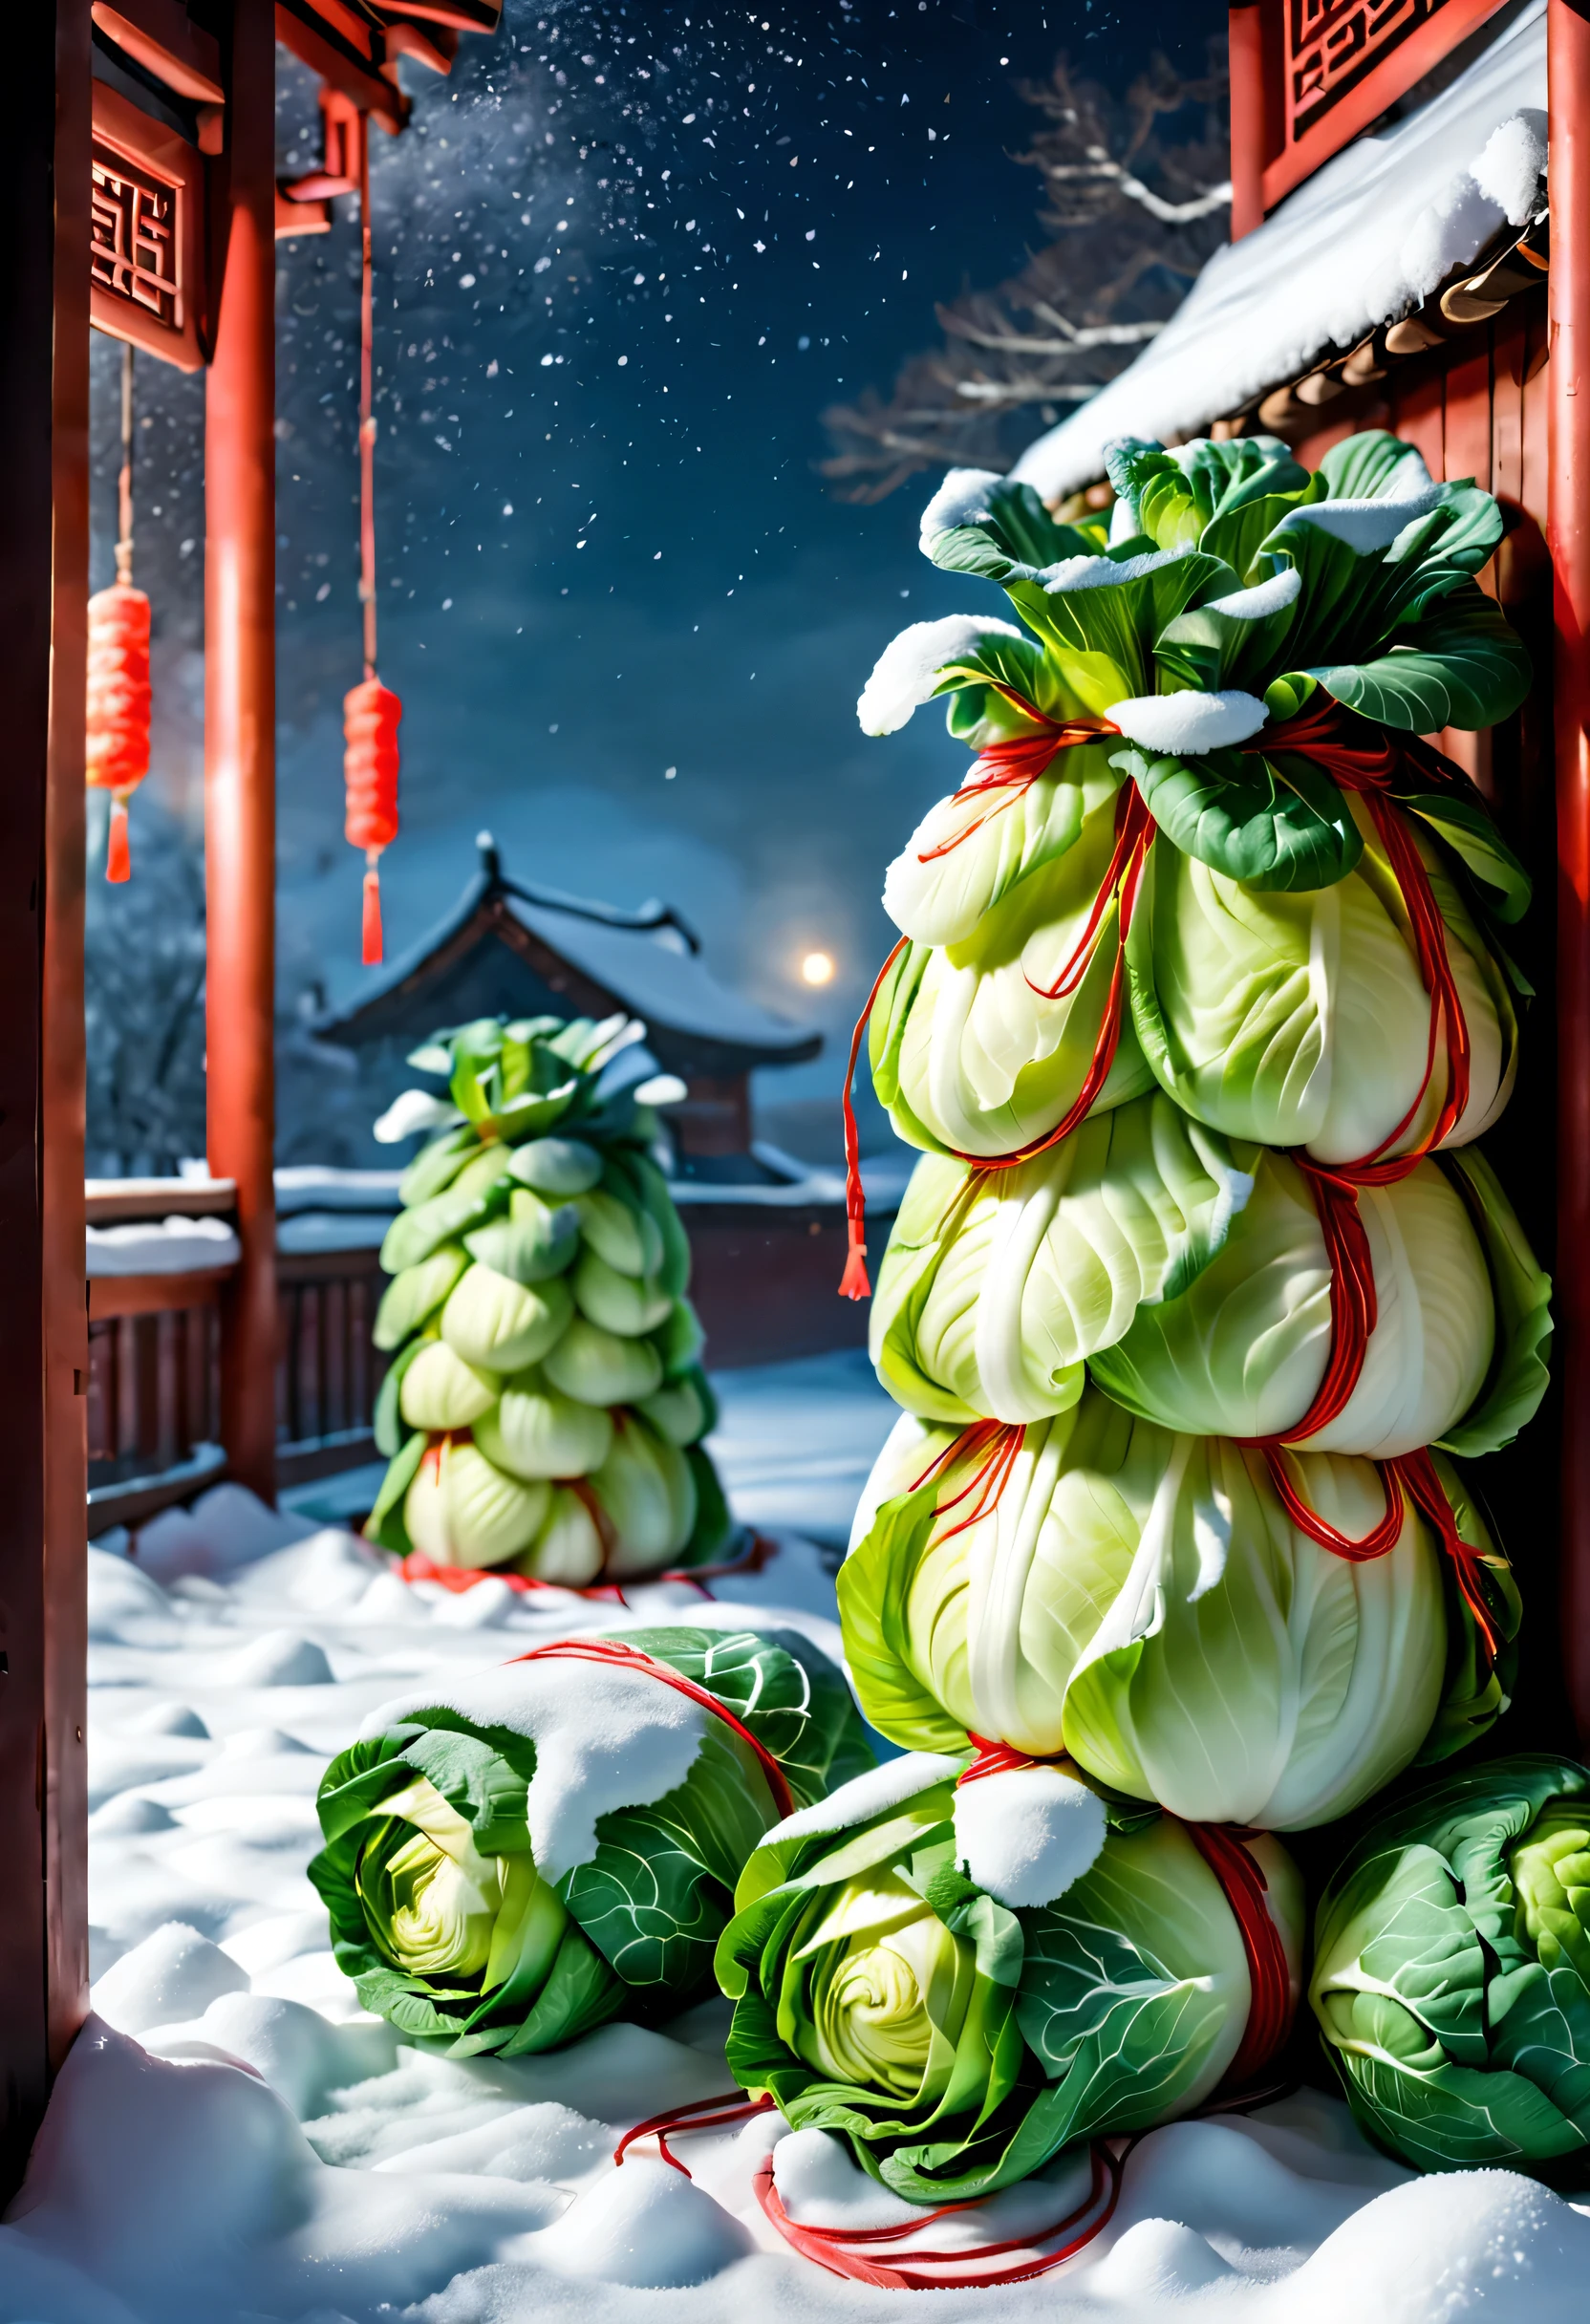 Snow-covered northeastern countryside festival night，（There are piles of Northeastern cabbage tied with red strings on the windowsill.）